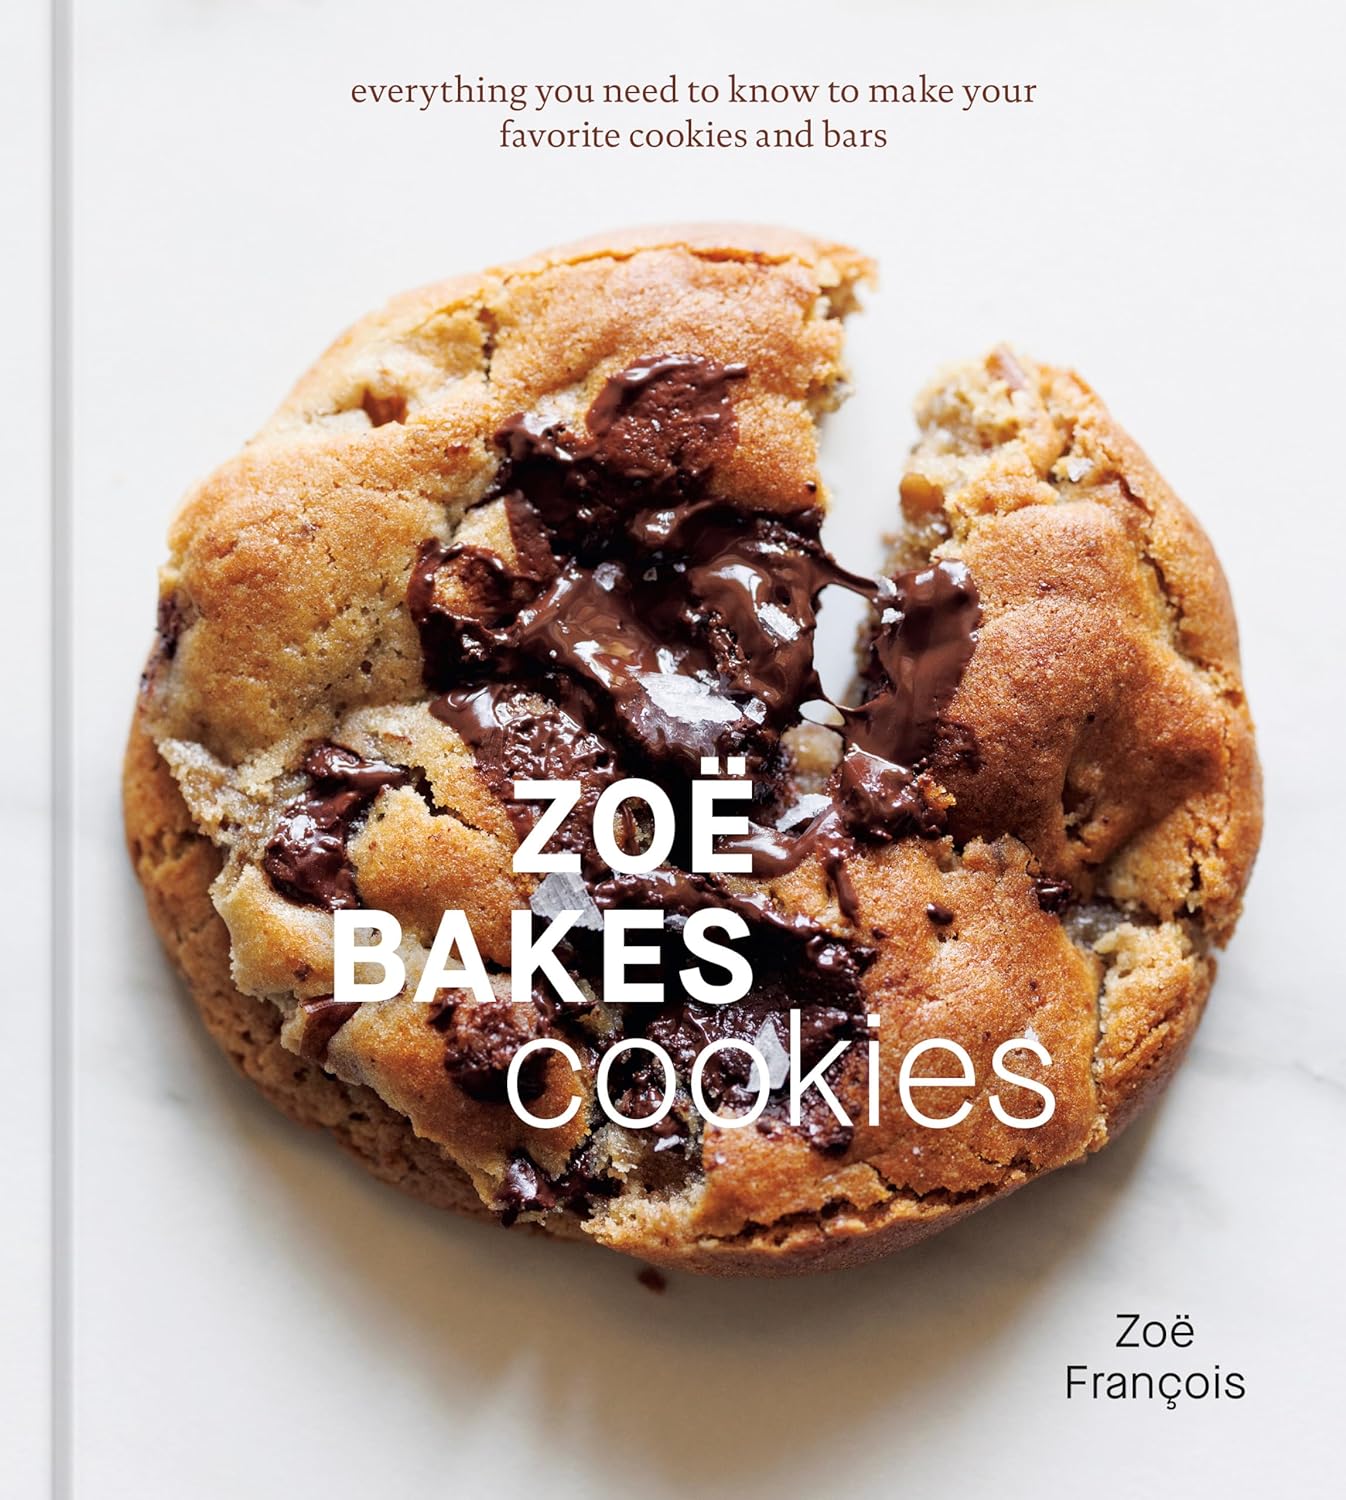 *Pre-order* Zoë Bakes Cookies: Everything You Need to Know to Make Your Favorite Cookies and Bars (Zoë François) *Signed*